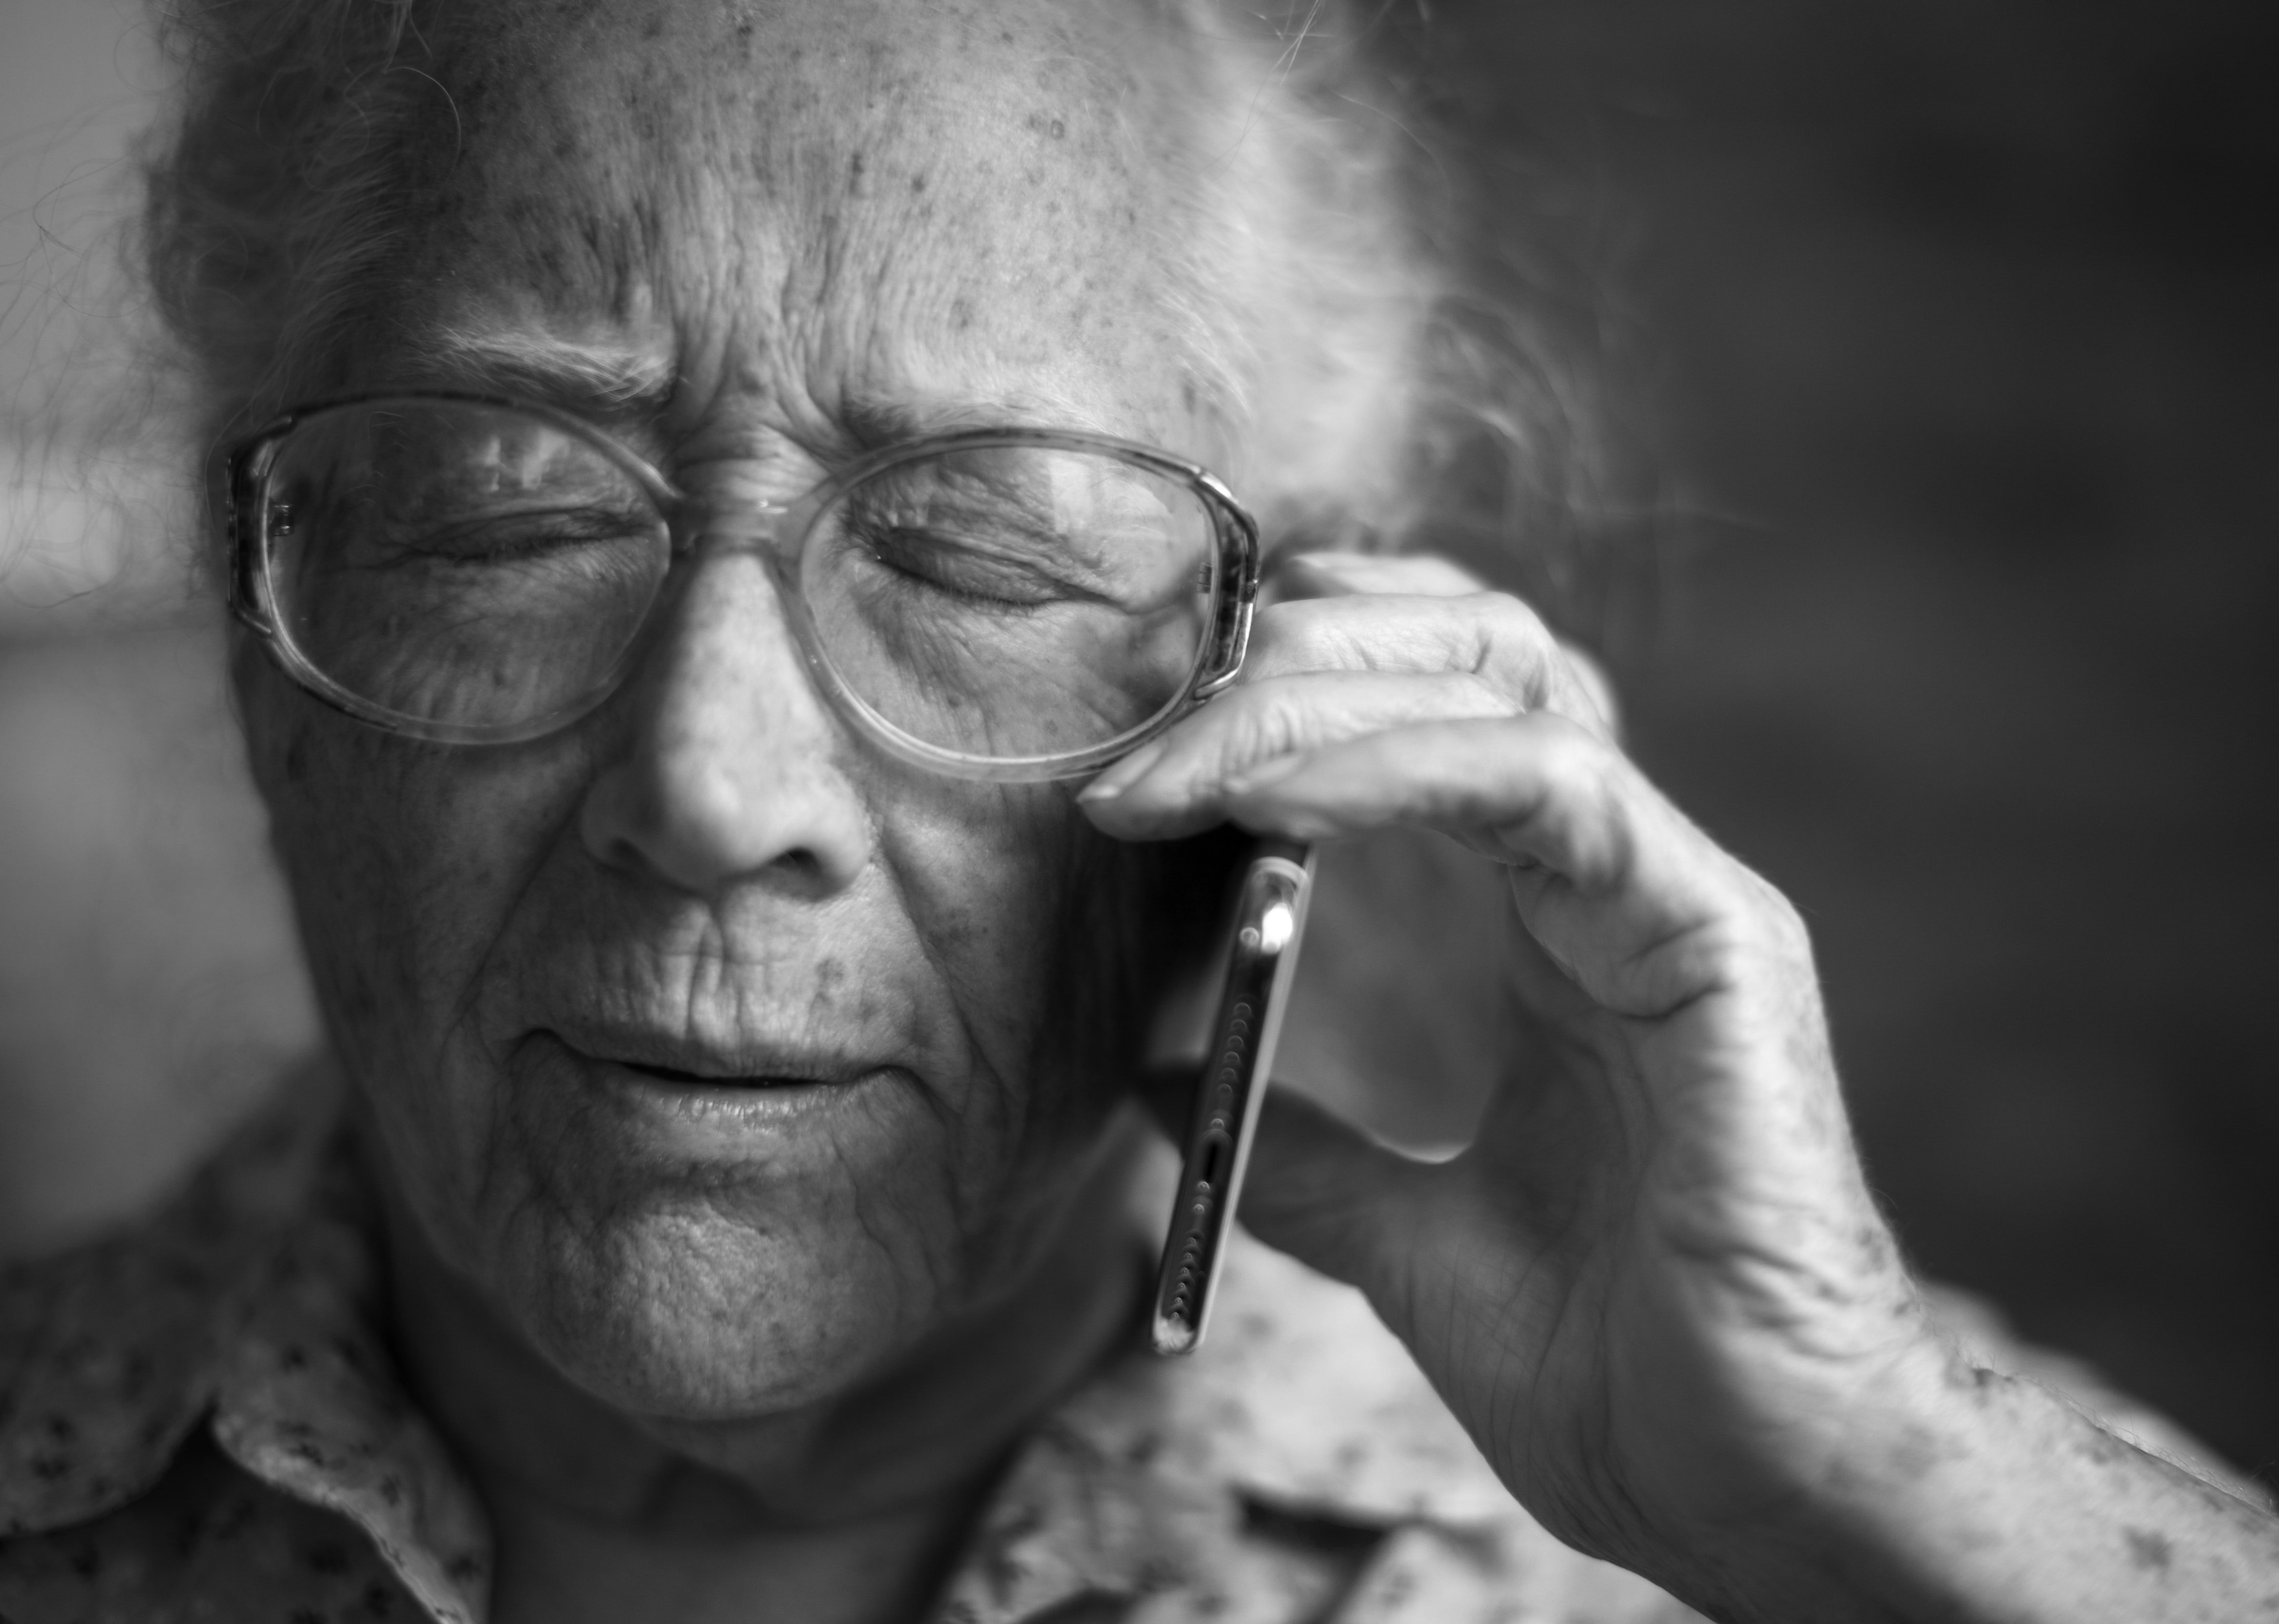 Old man on the phone. | Source: Pexels